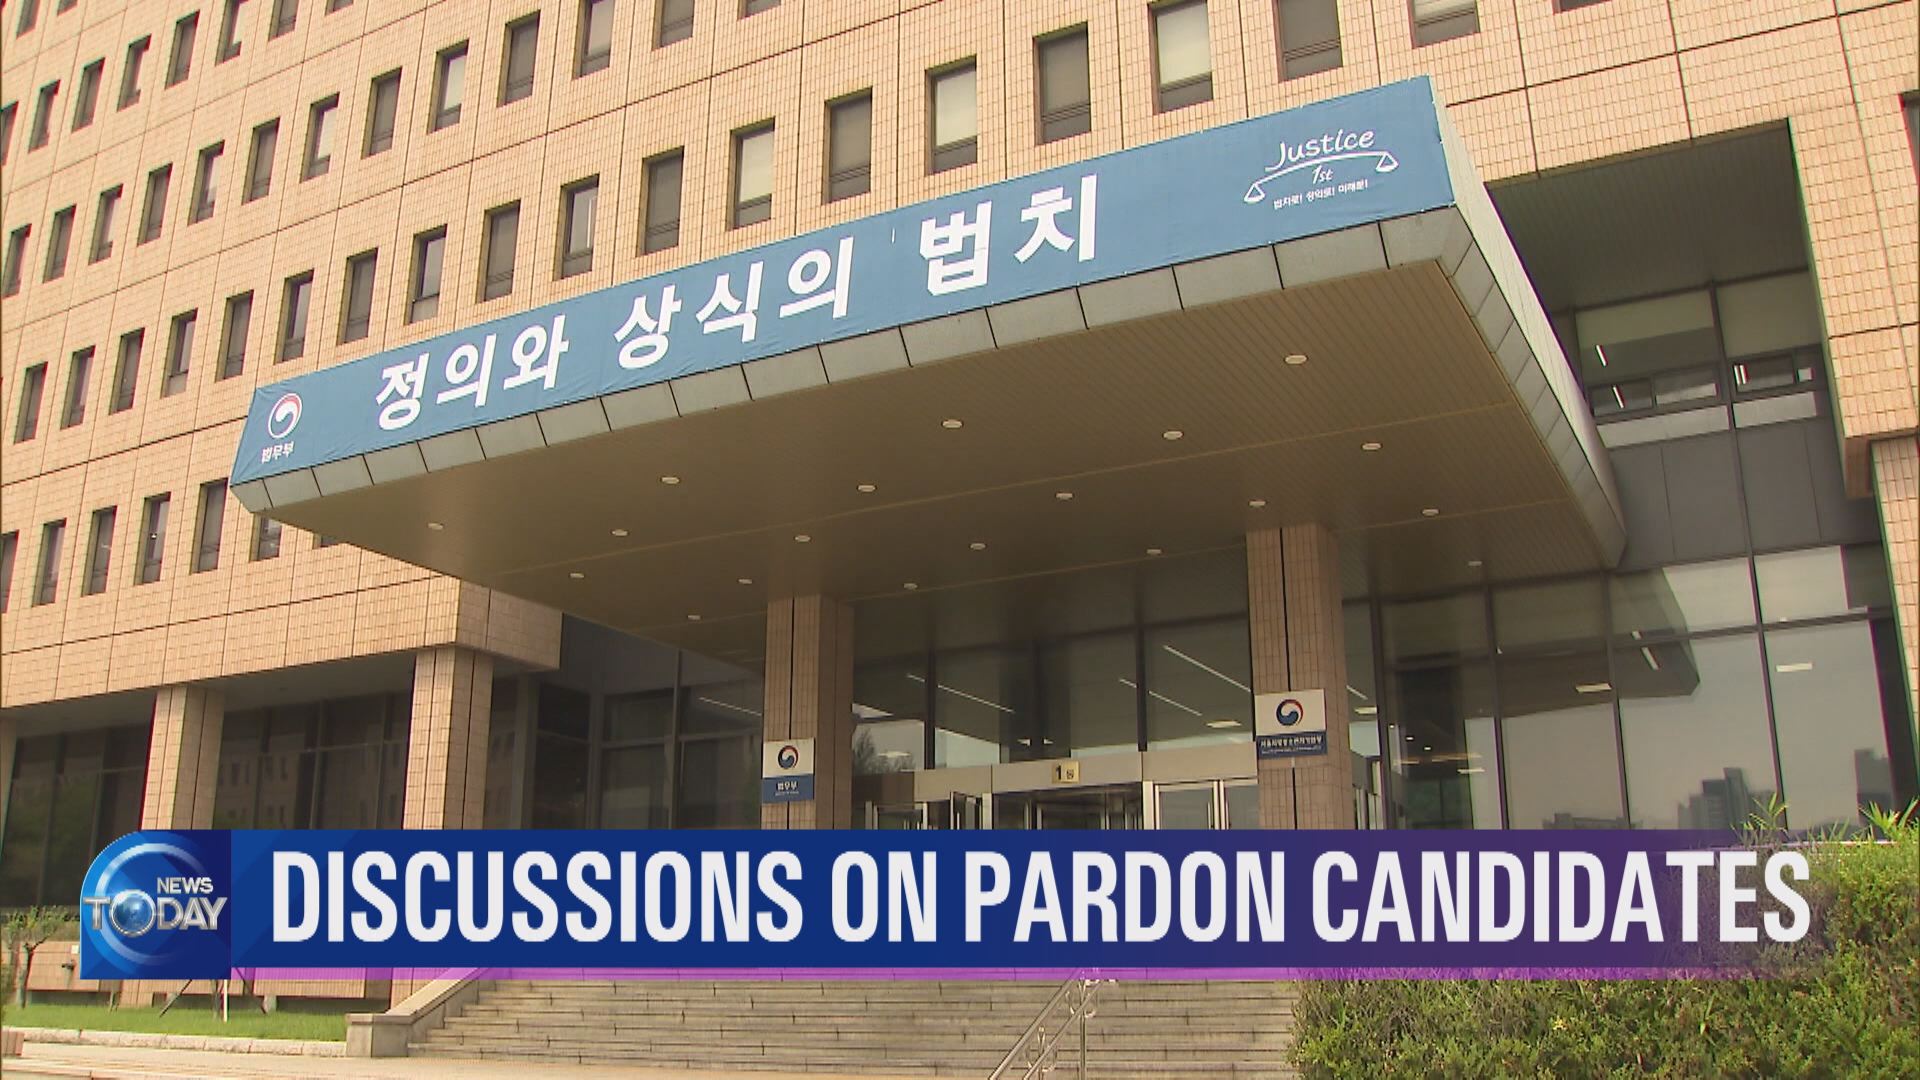 DISCUSSIONS ON PARDON CANDIDATES